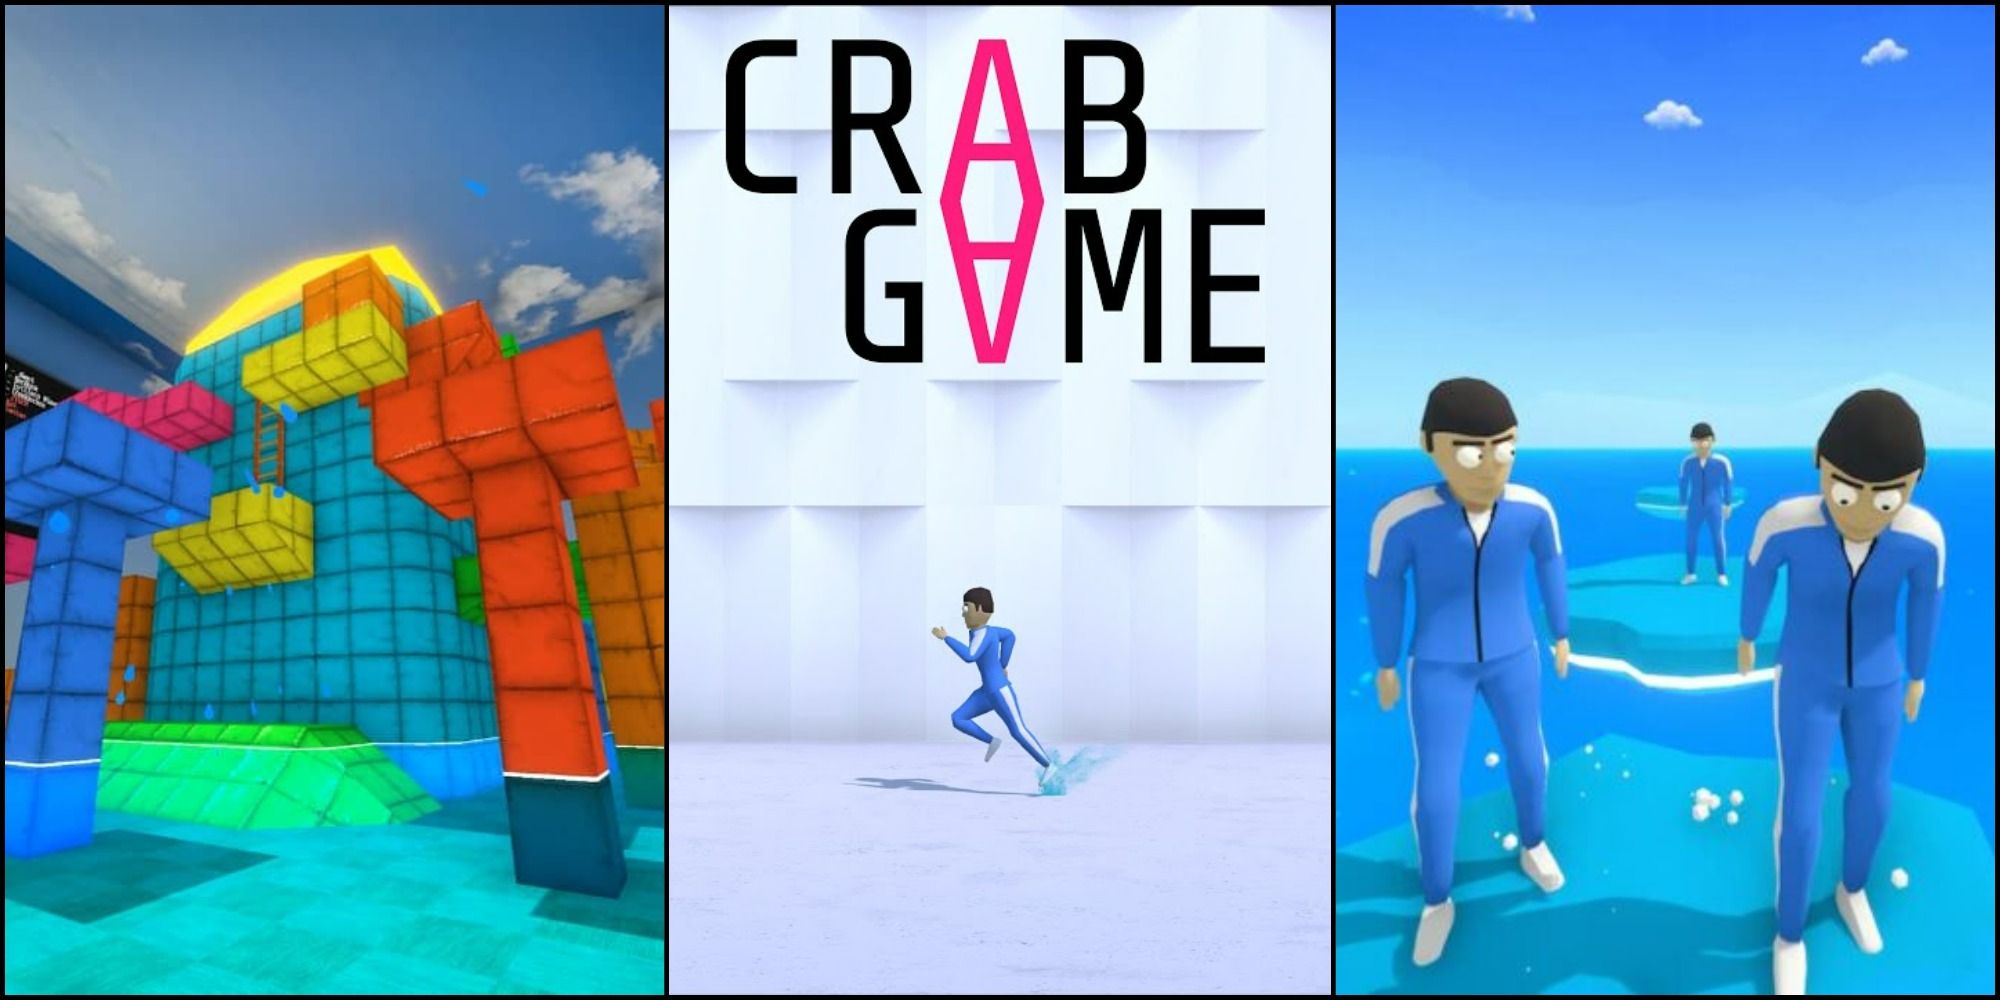 Crab Game is taking over Steam